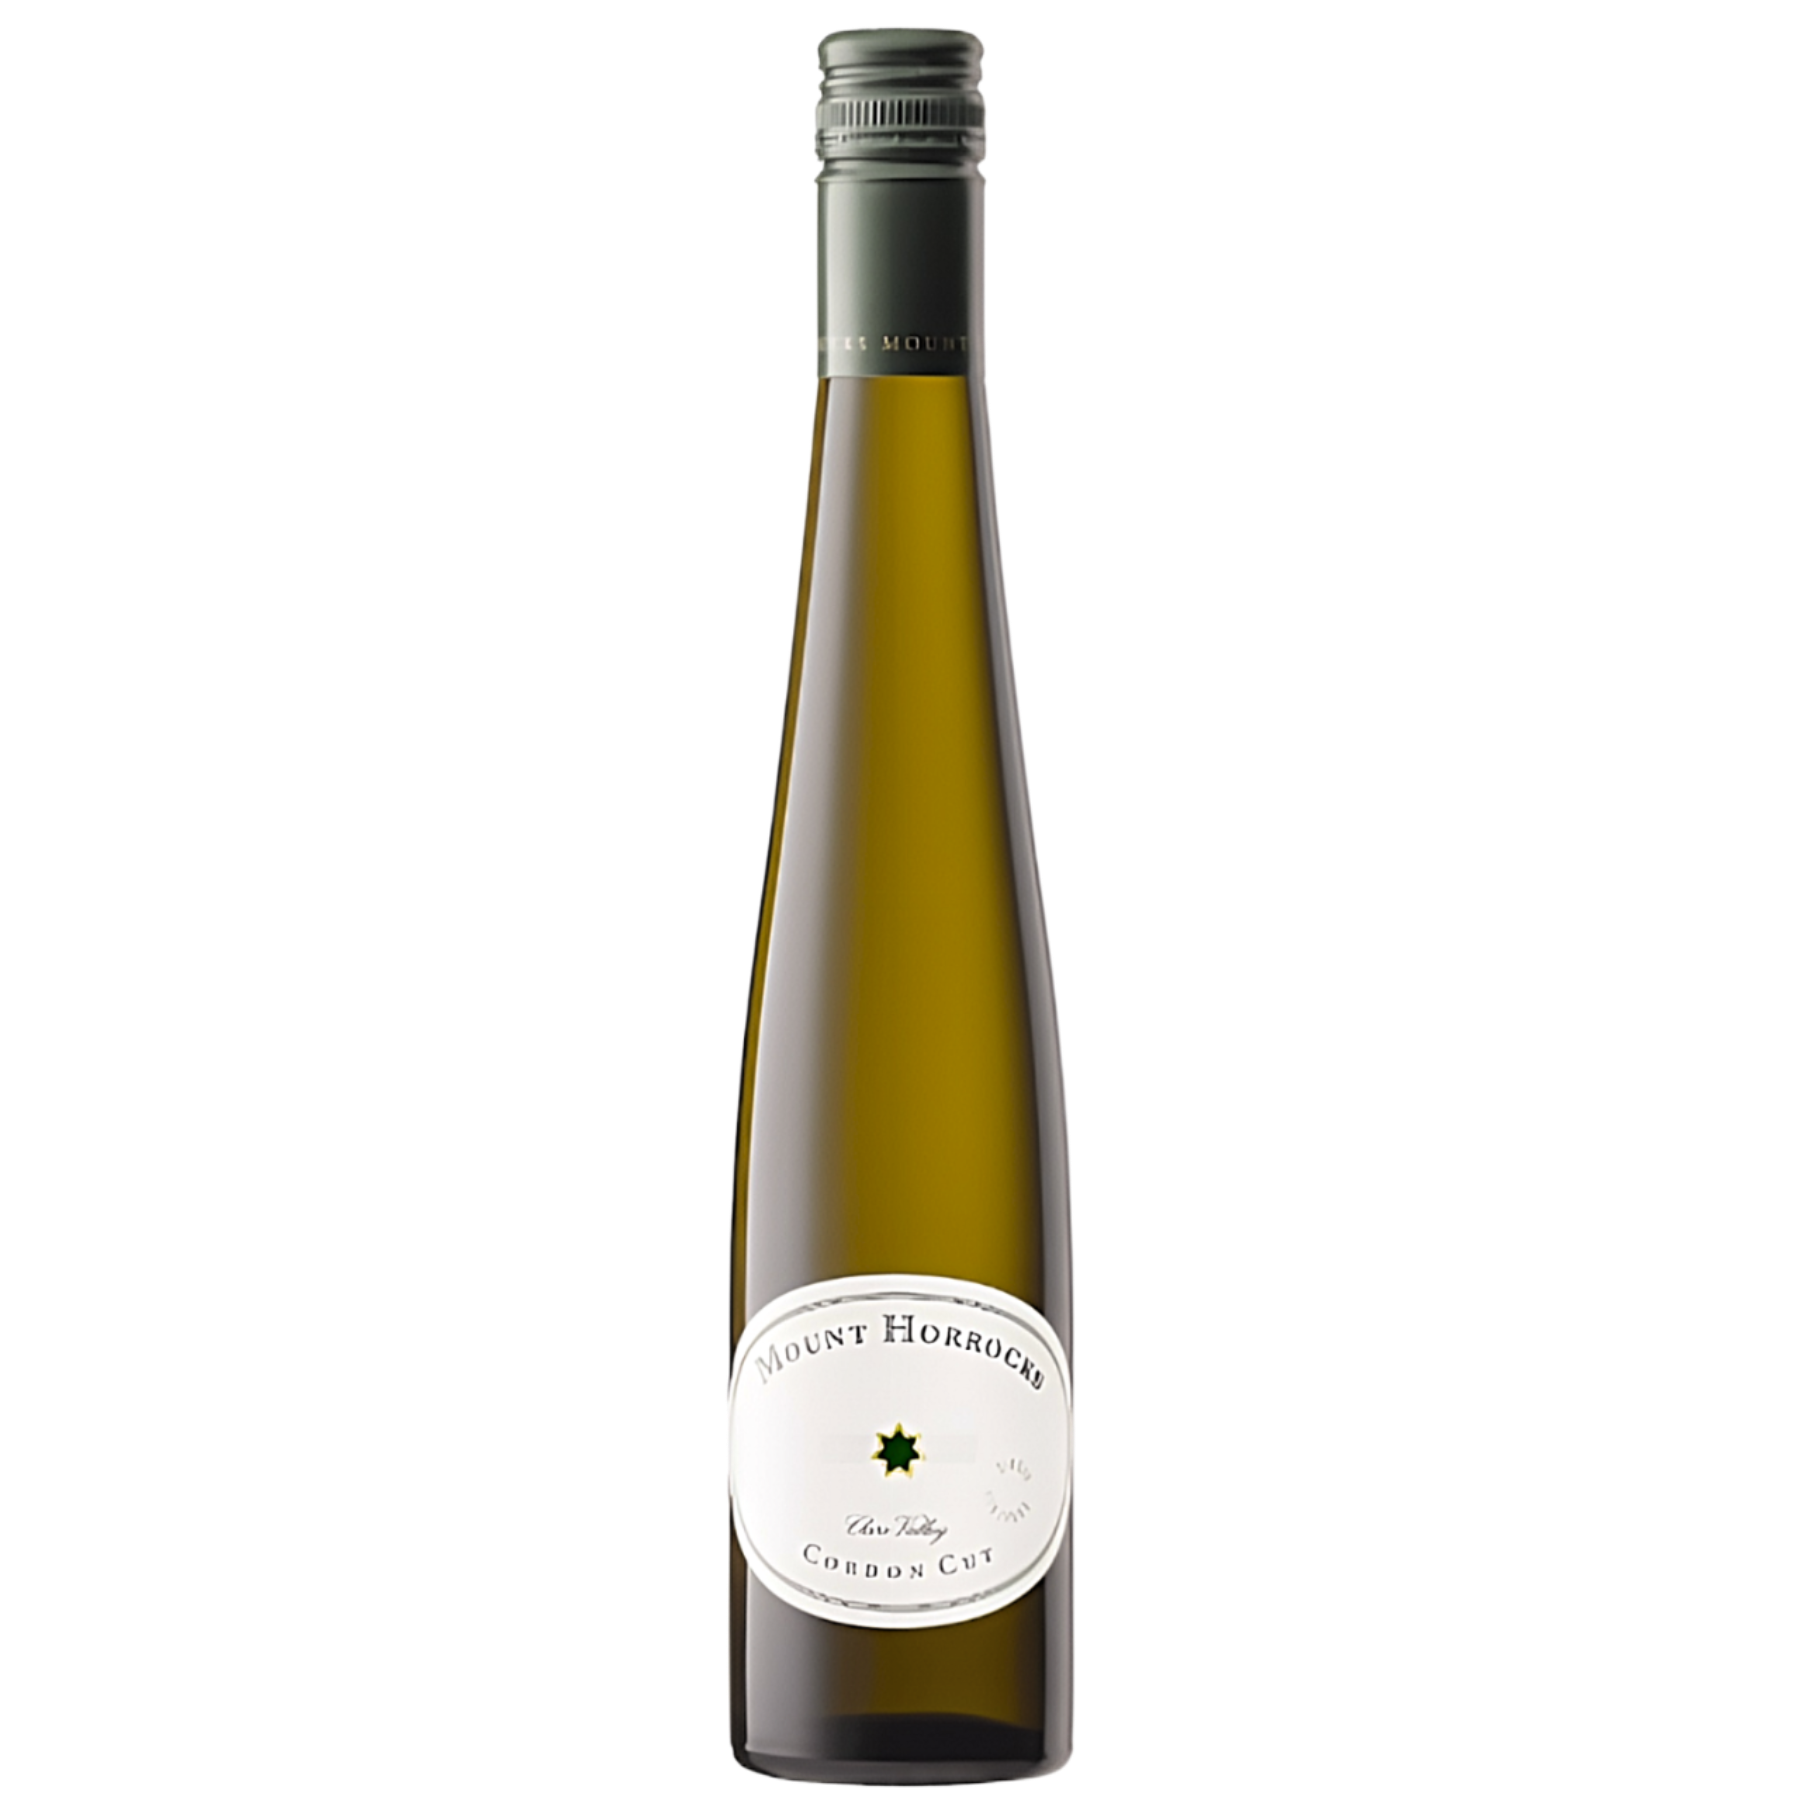 Mount Horrocks Riesling Cordon Cut Clare Valley White